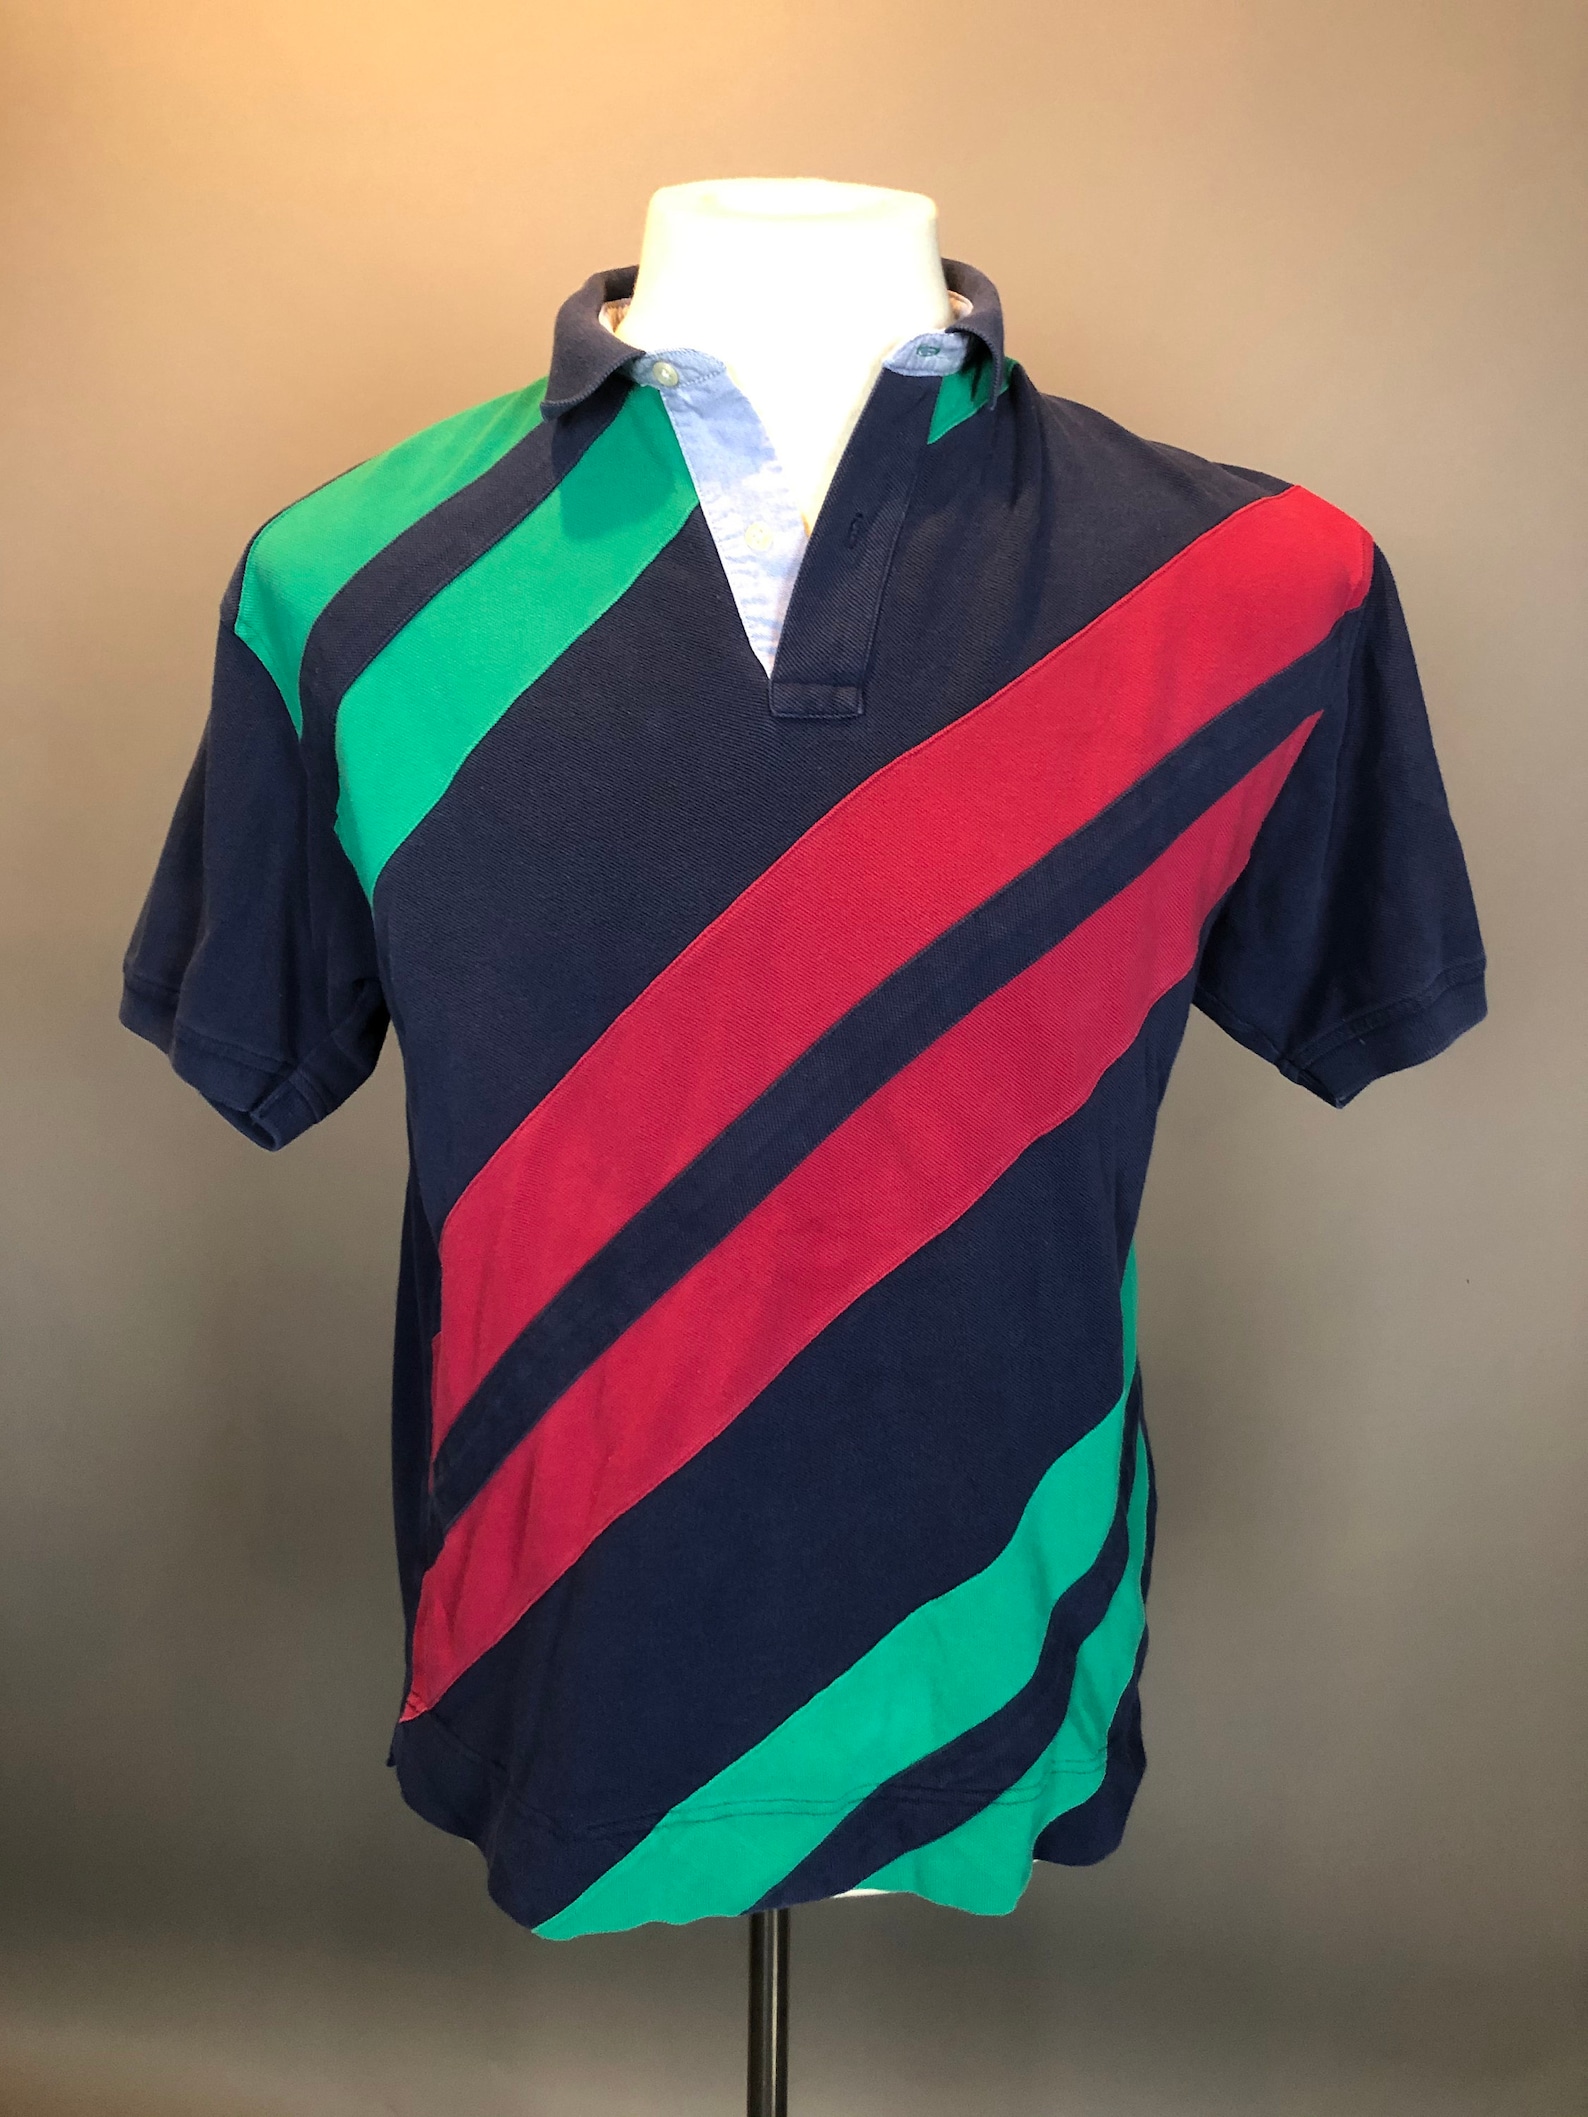 Tommy Hilfiger Striped Short Sleeve Collared Knit Shirt. - Etsy